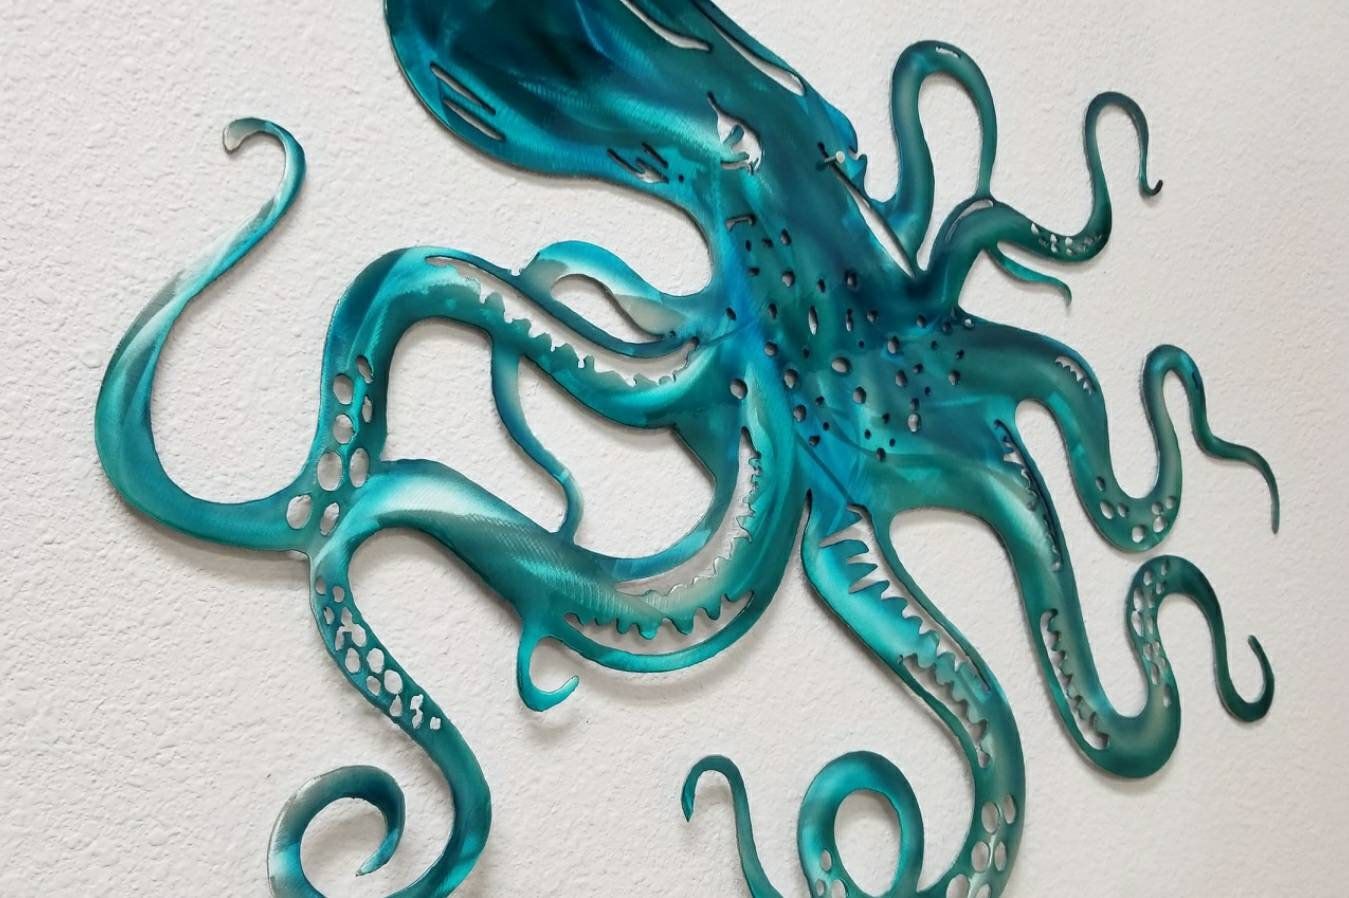 Octopus Metal Wall Art, Turqoise And Blue Octopus, Home Decor For With Regard To Octopus Metal Wall Sculptures (View 6 of 15)